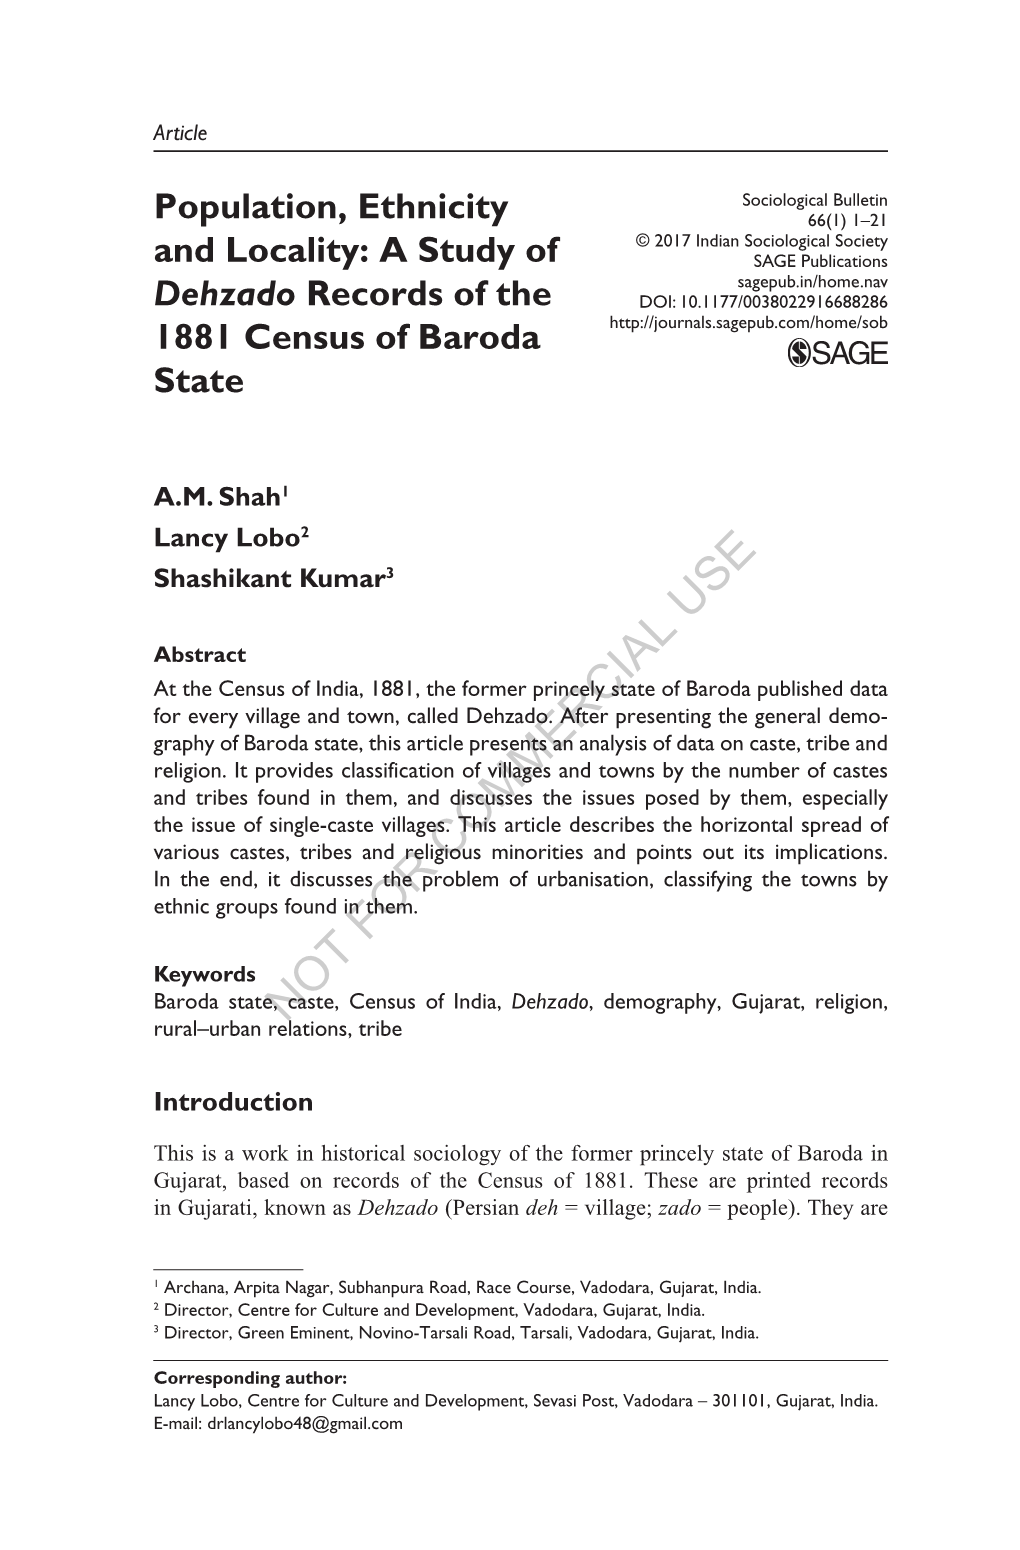 A Study of Dehzado Records of the 1881 Census of Baroda State